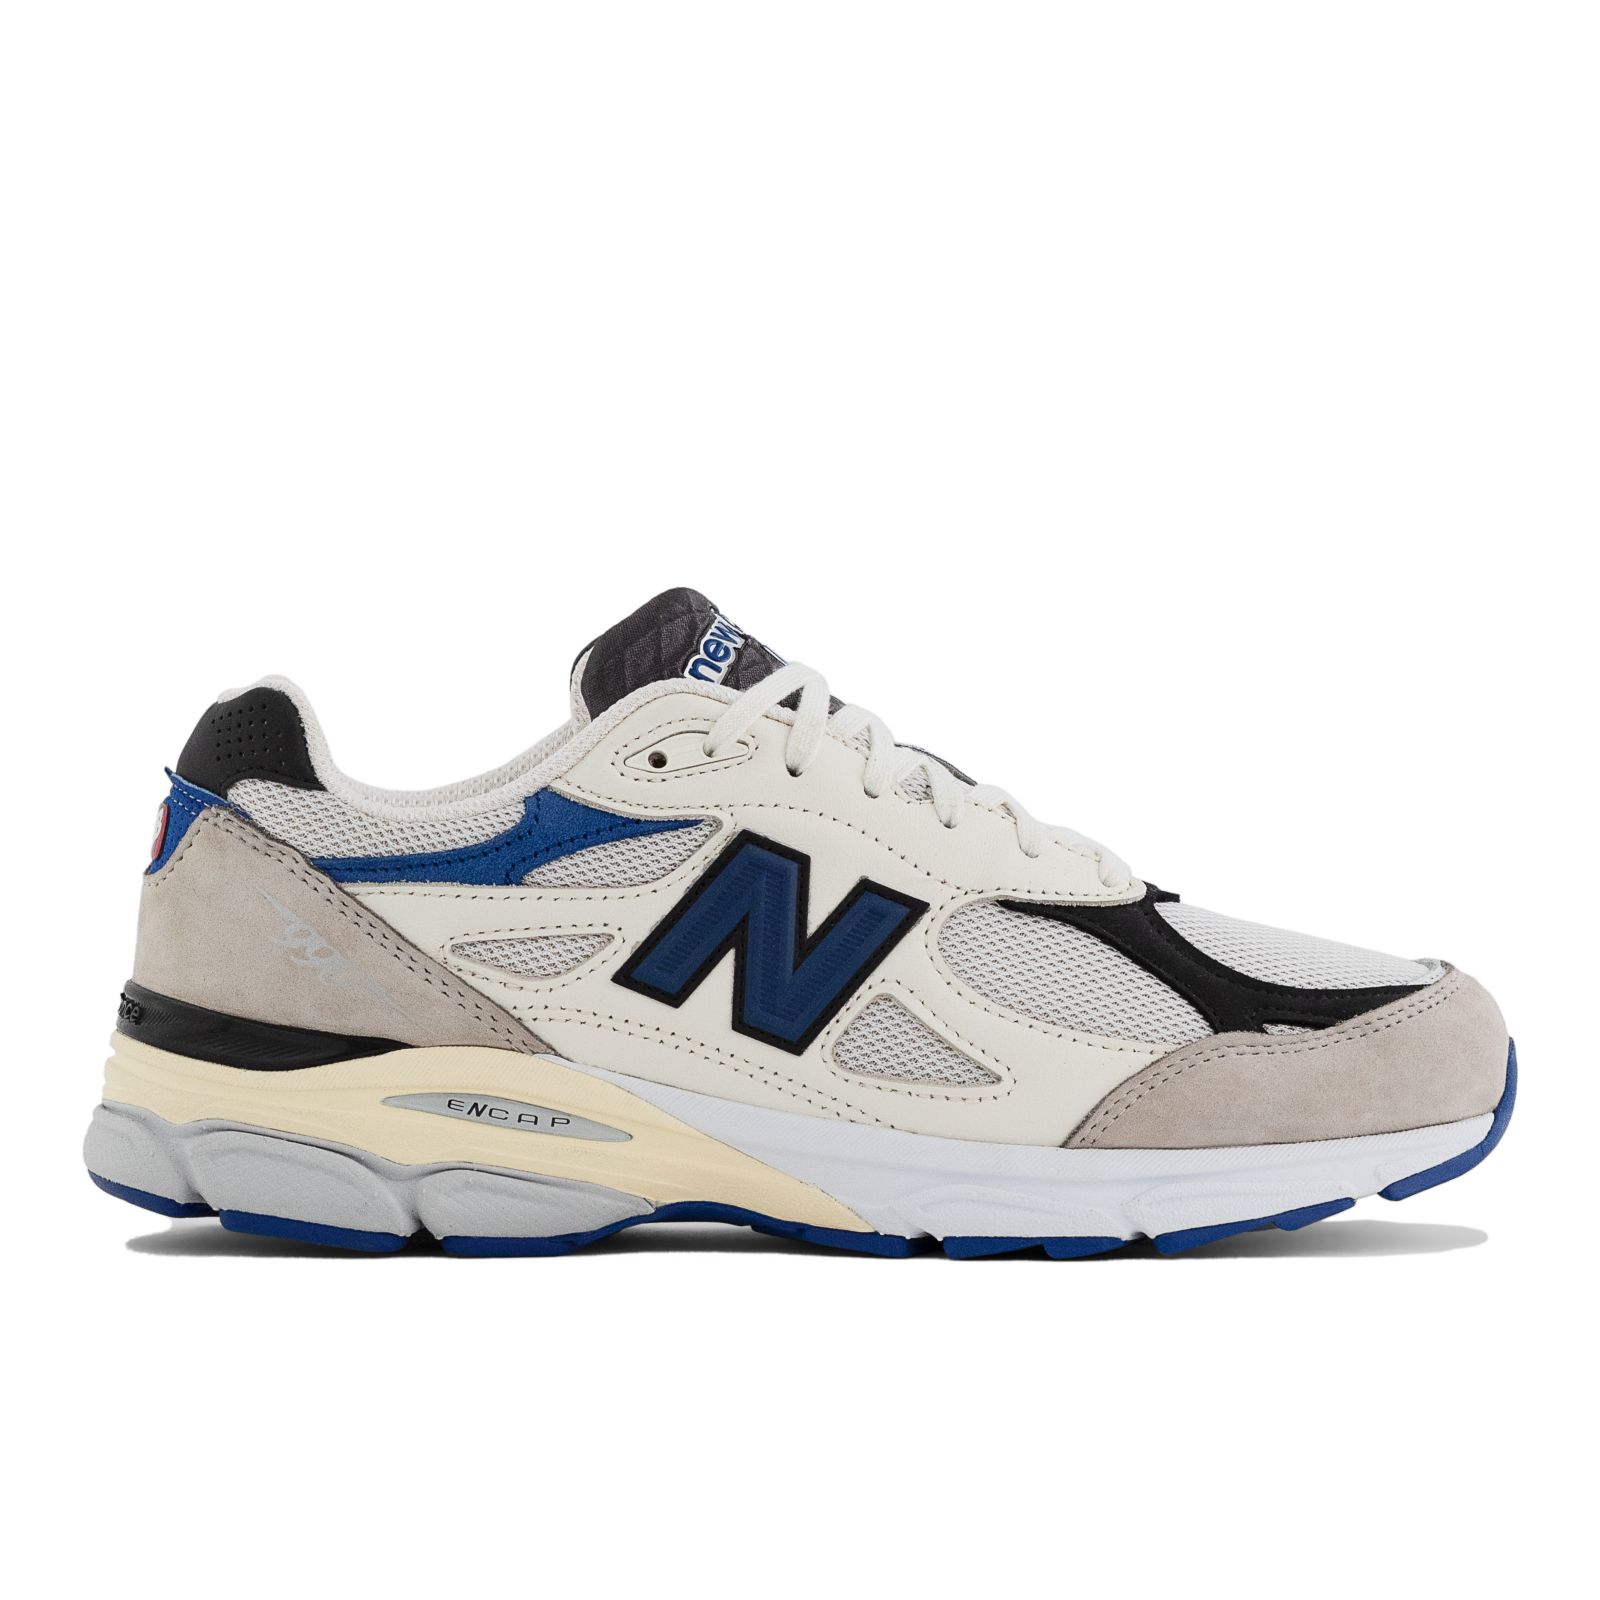 Men's Made in USA 990v3 Lifestyle - New Balance